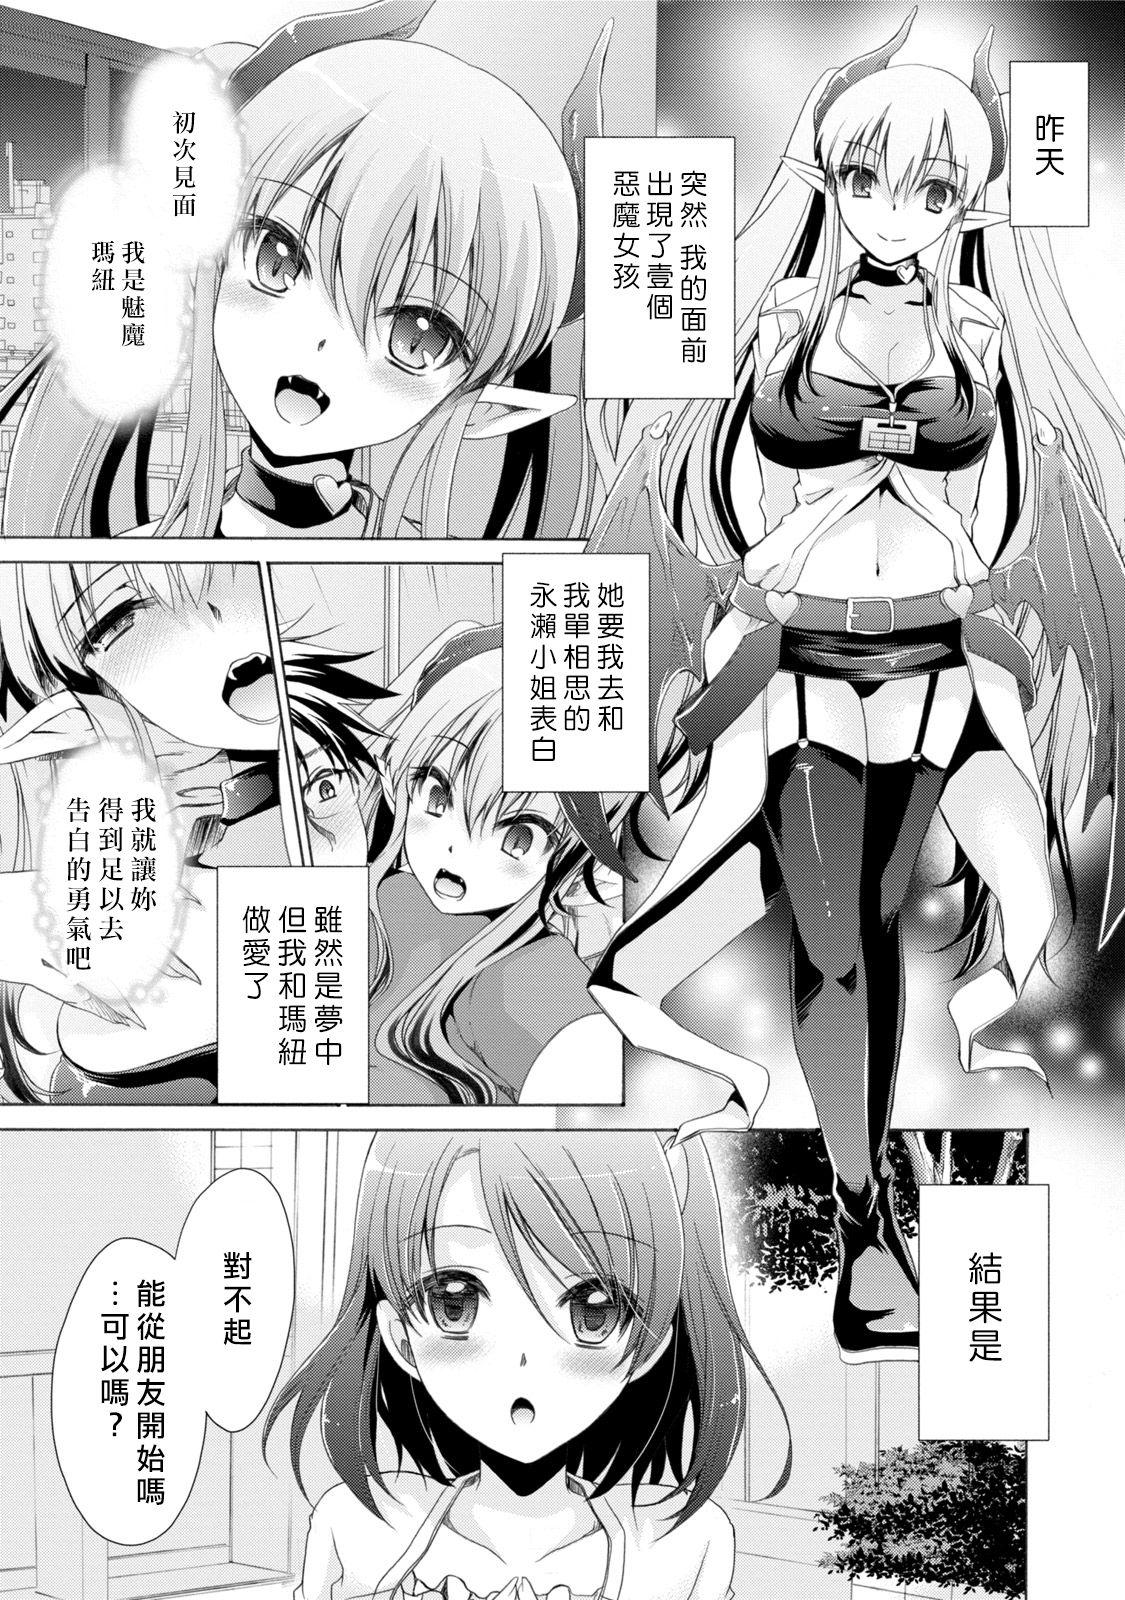 Old And Young Ore to Kanojo to Owaru Sekai - World's end LoveStory 1 Blacksonboys - Page 27